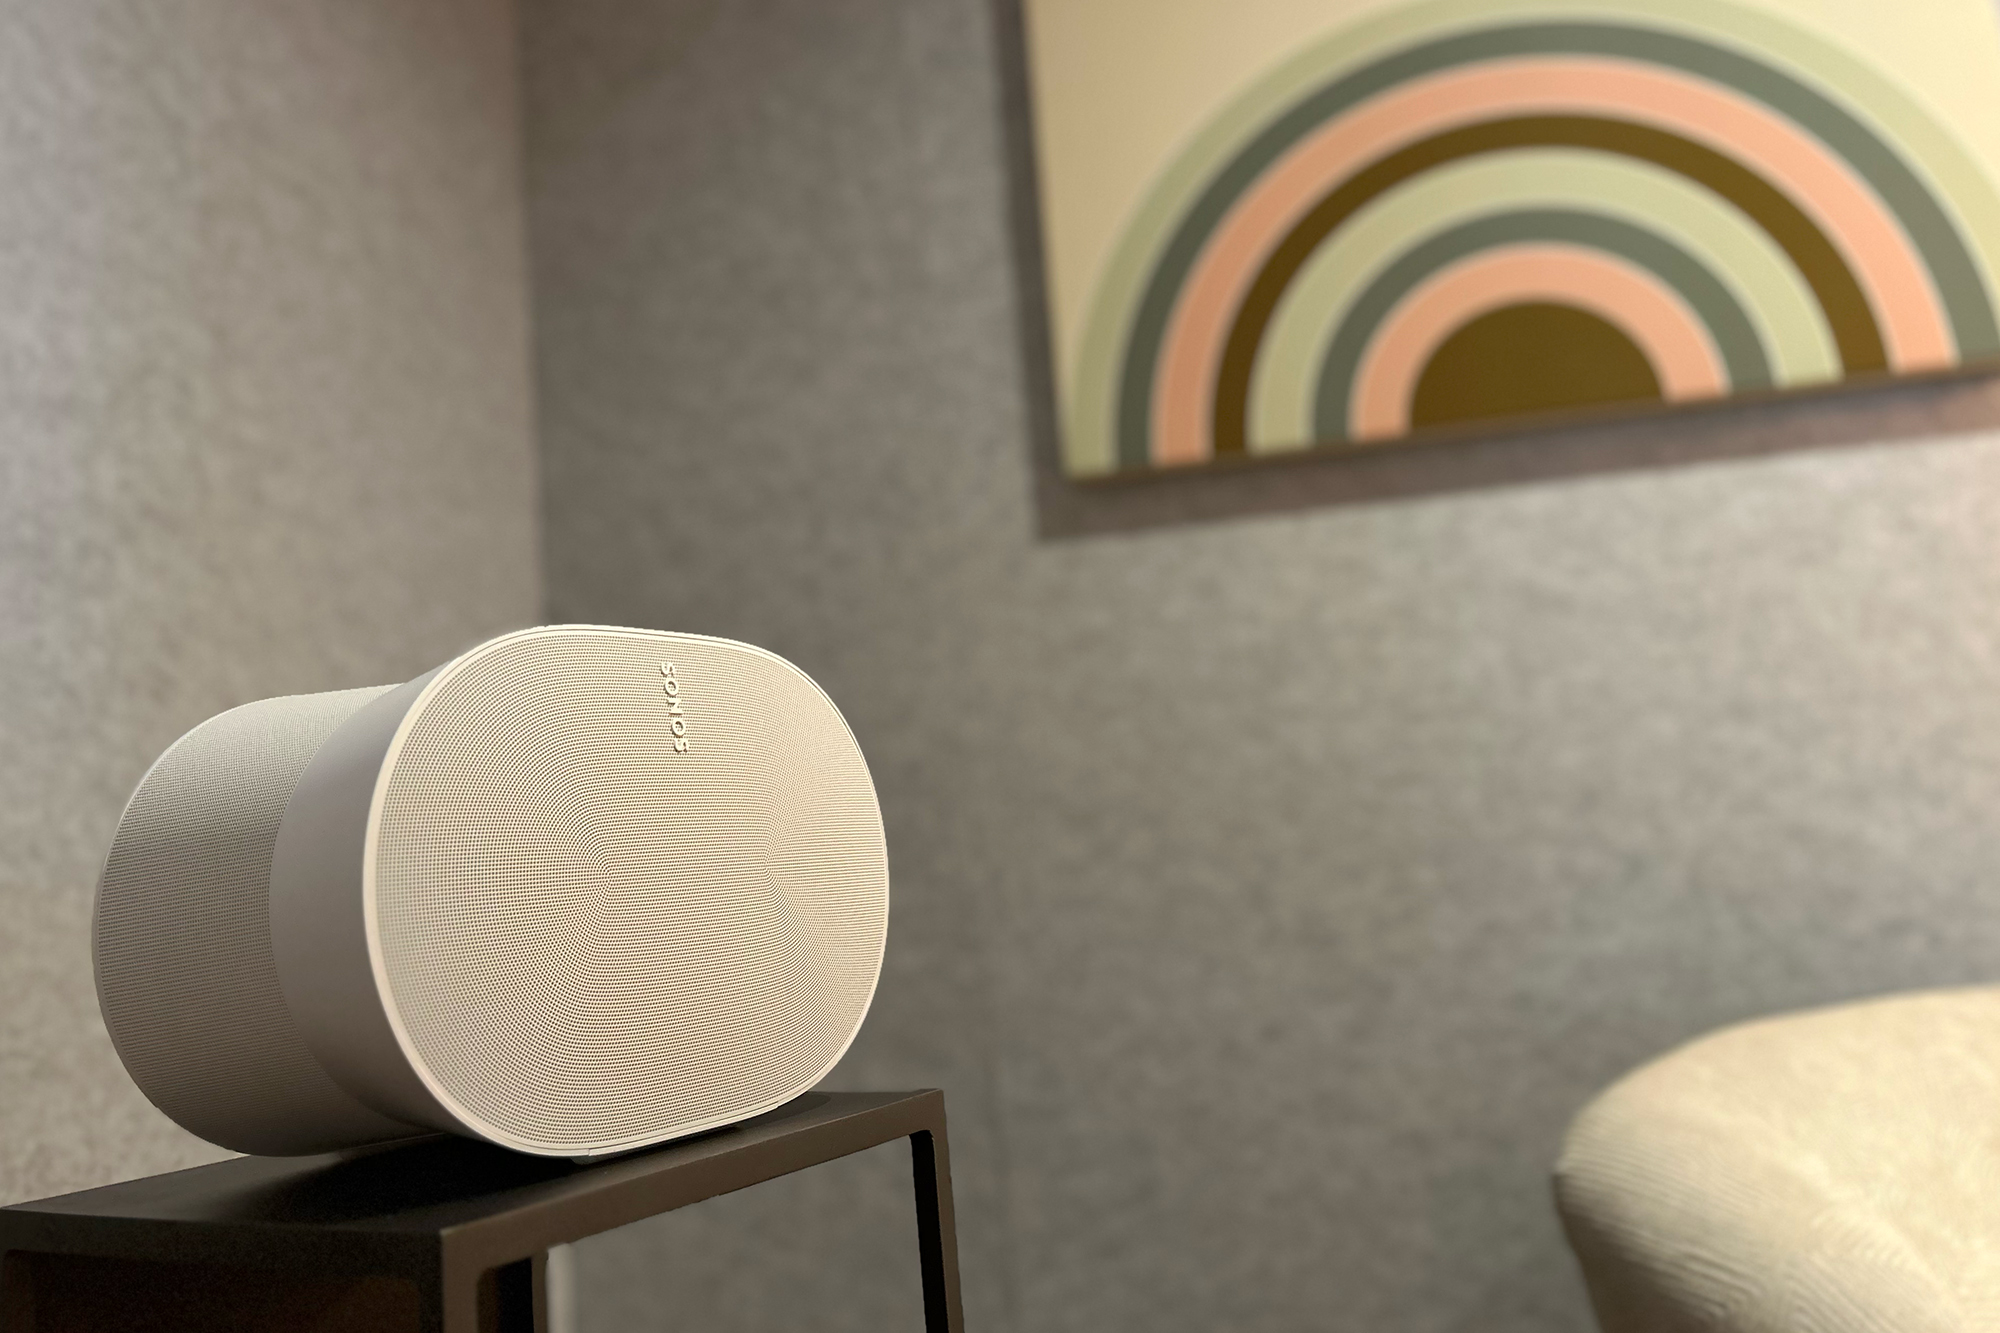 How ERA 300 positioning fits into the Dolby speaker 7.1 layout : r/sonos